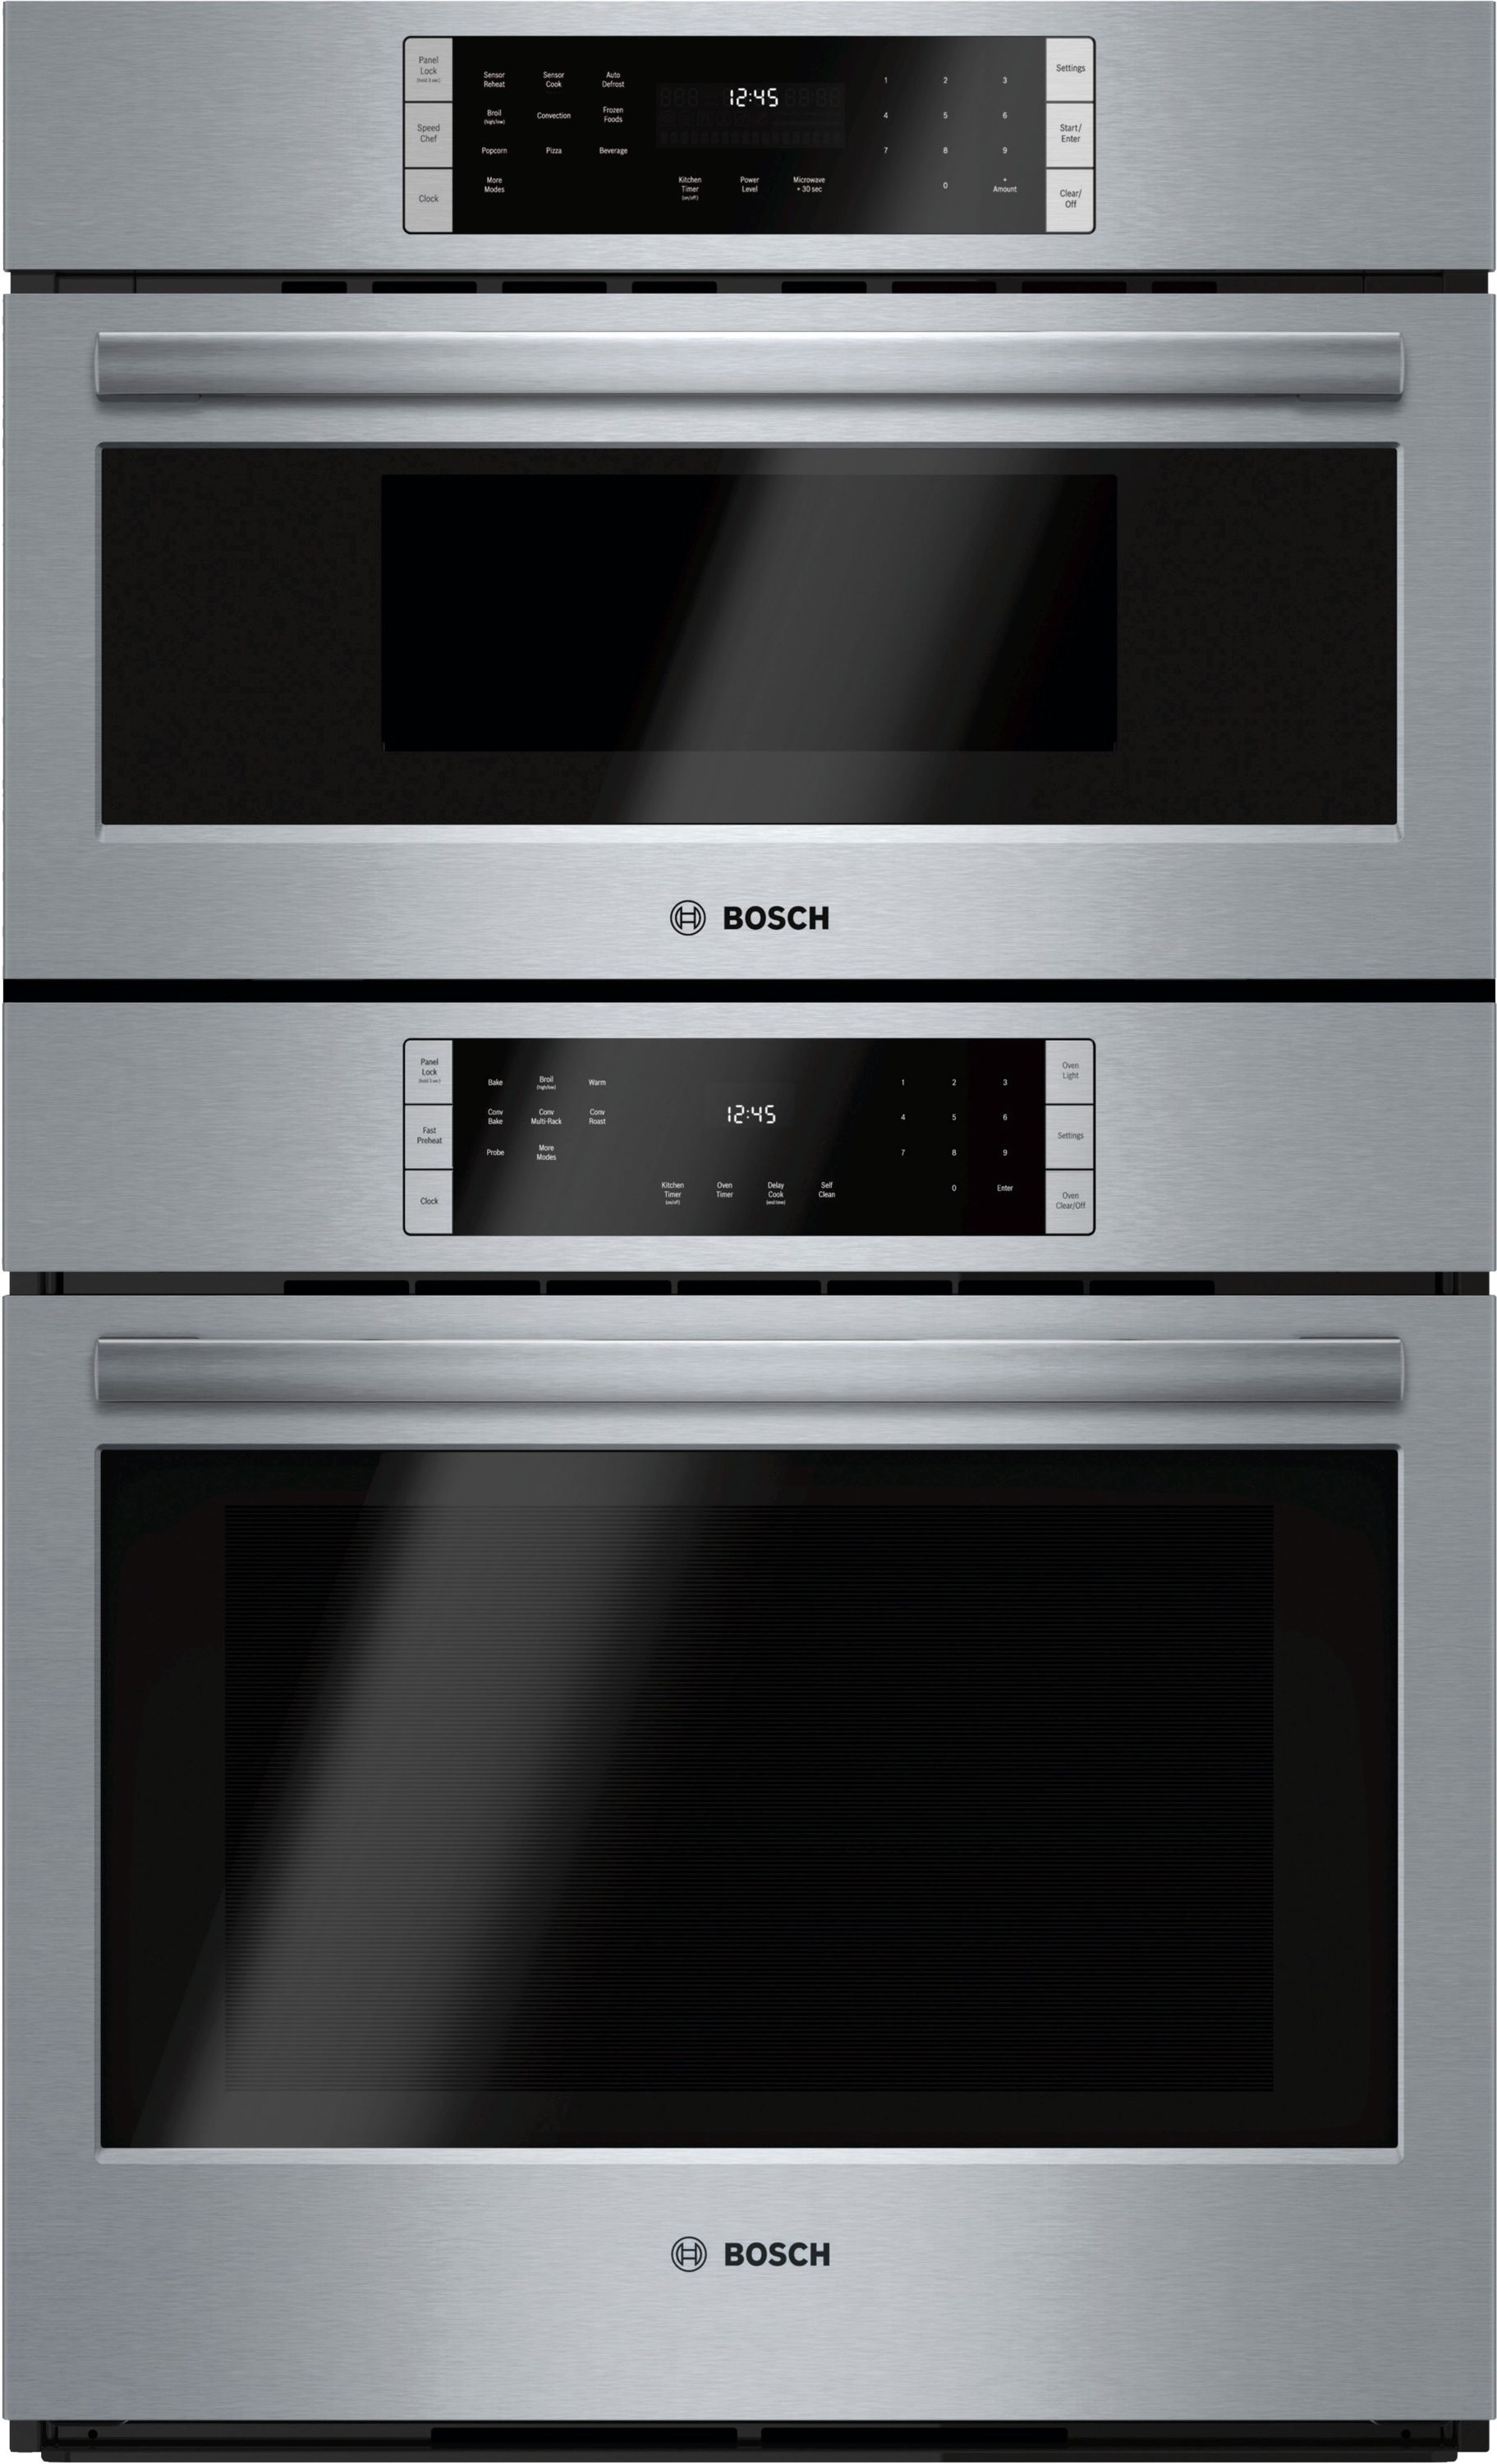 Bosch BSH SP MICRO W OVN in the Microwave Wall Oven Combinations at Lowes.com